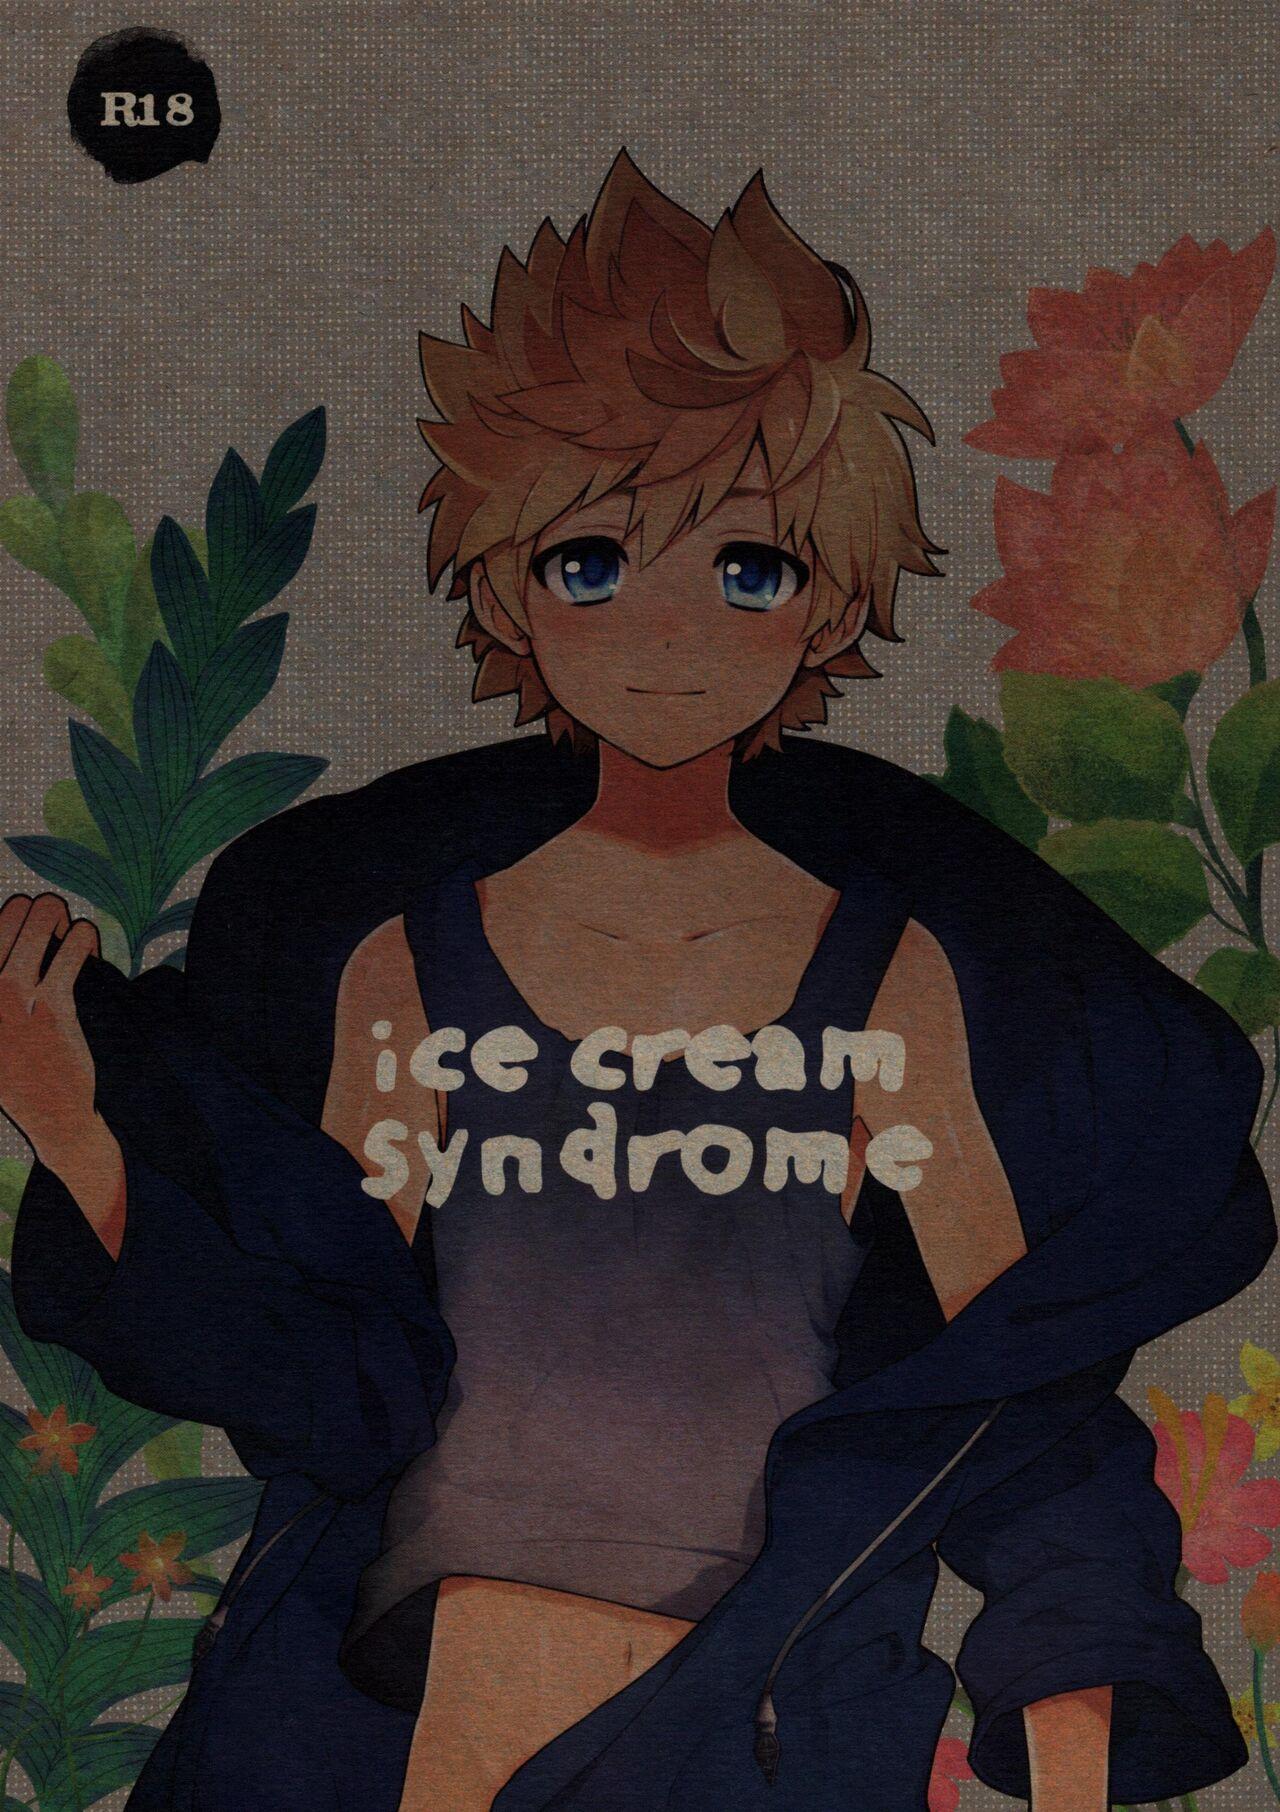 Gang Bang ice cream syndrome - Kingdom hearts Step - Picture 1